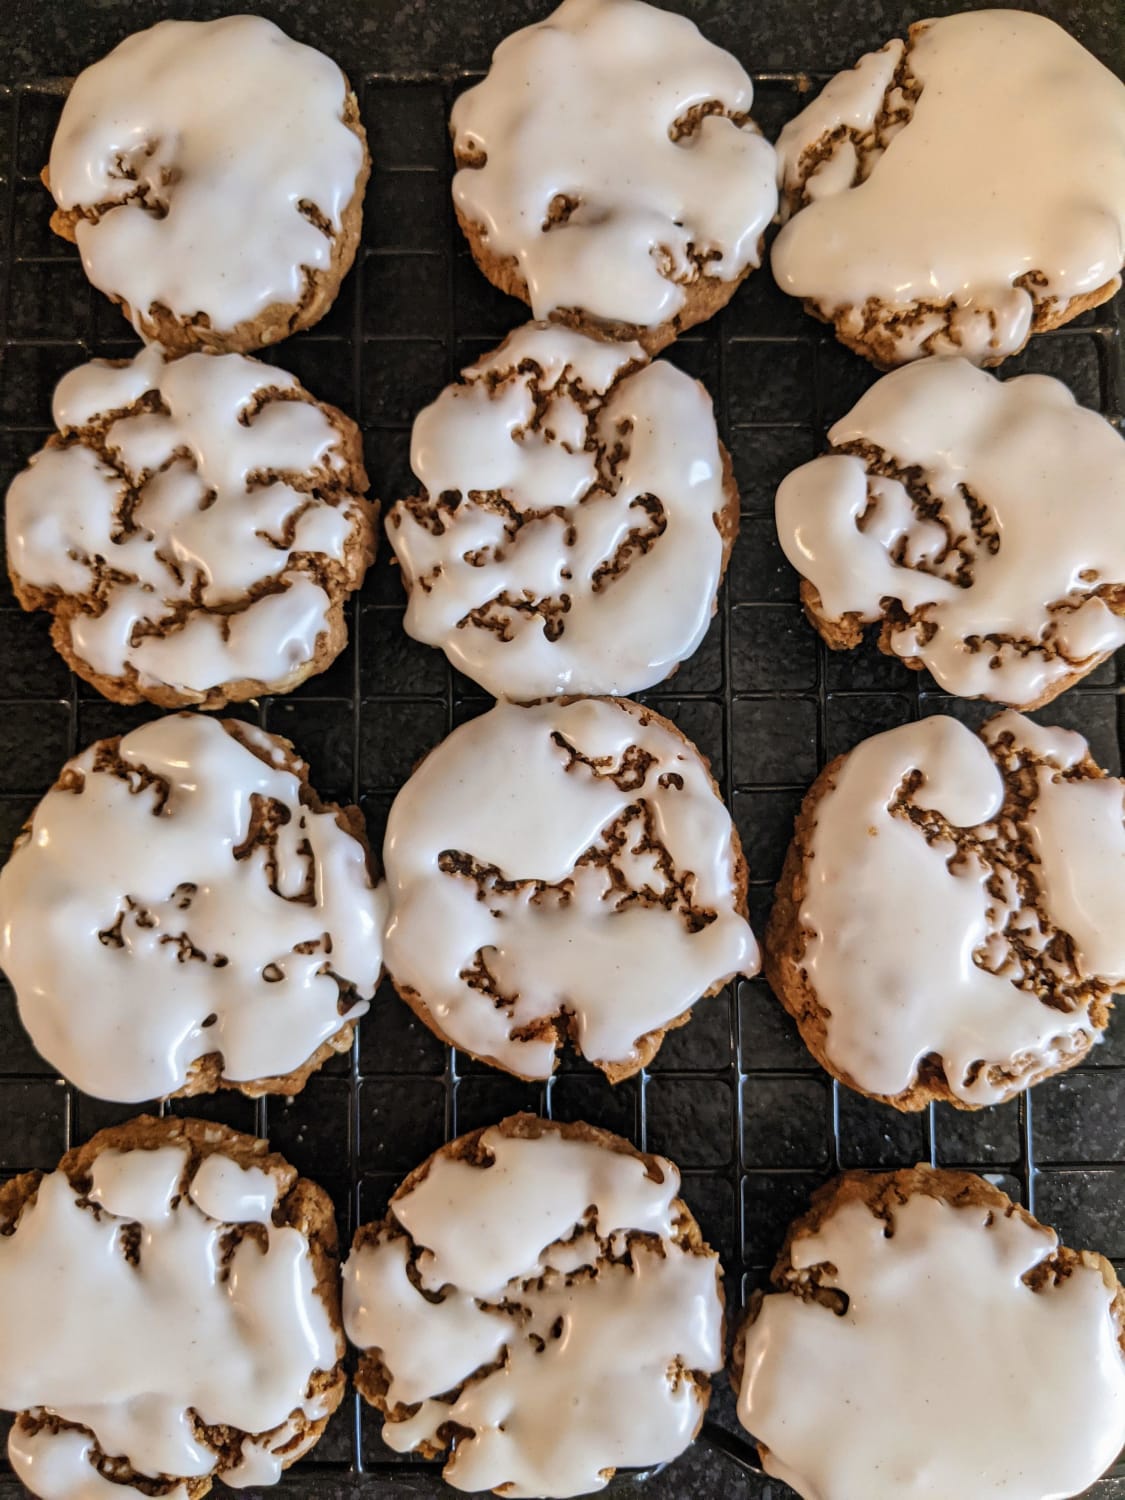 Iced gingerbread oatmeal cookies. Husband just snagged his third and fourth cookie, so I think they're a hit 😆